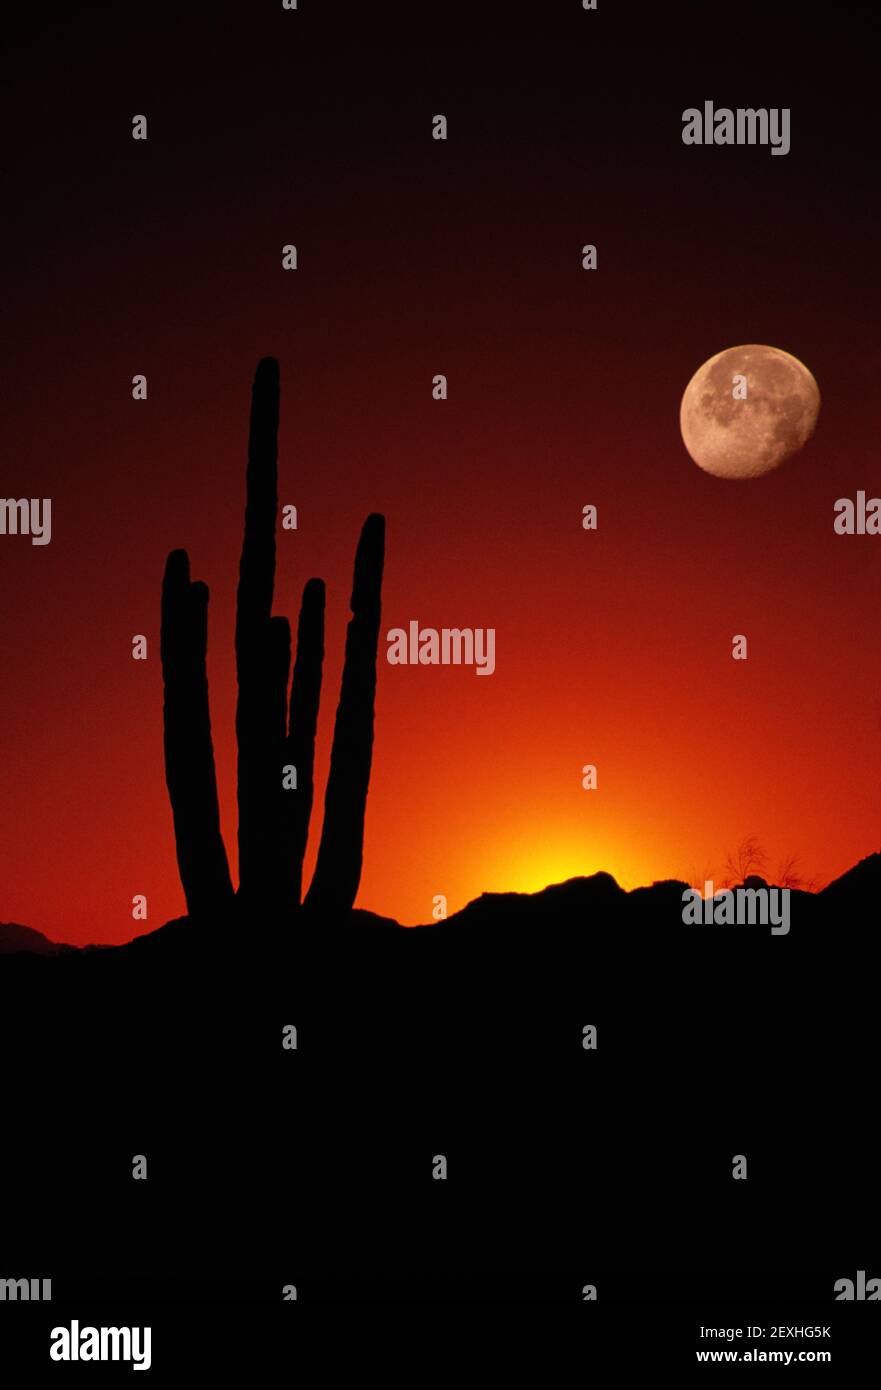 Vertical Composition showing Saguaro Cactus and Full Moon at Sunset Stock Photo